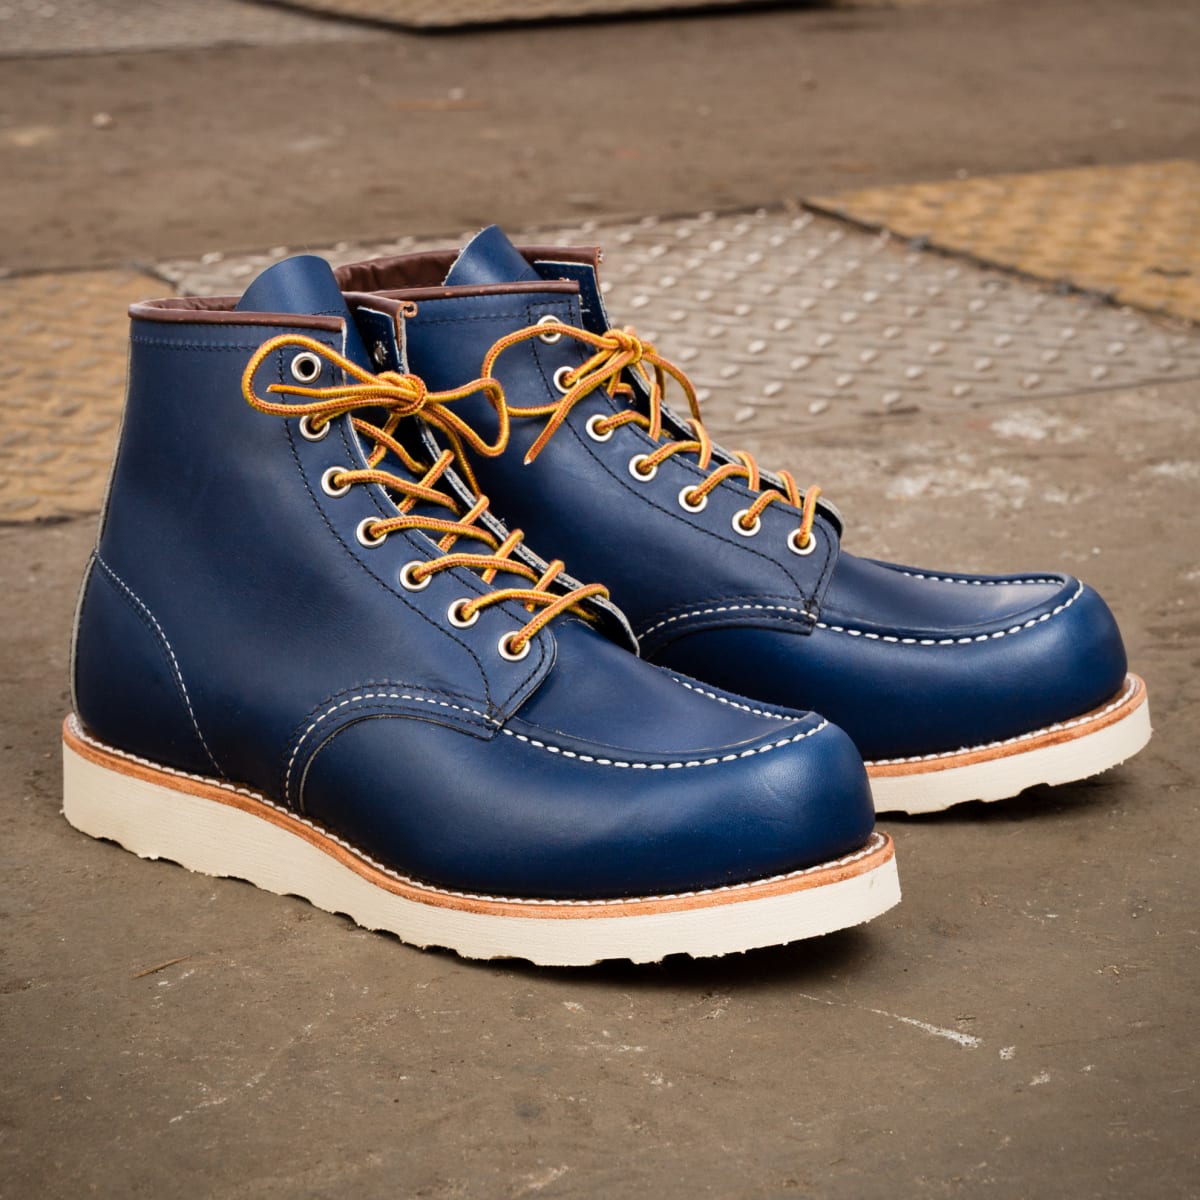 Red Wing Heritage brightens up its lineup with an 8882 Acquire